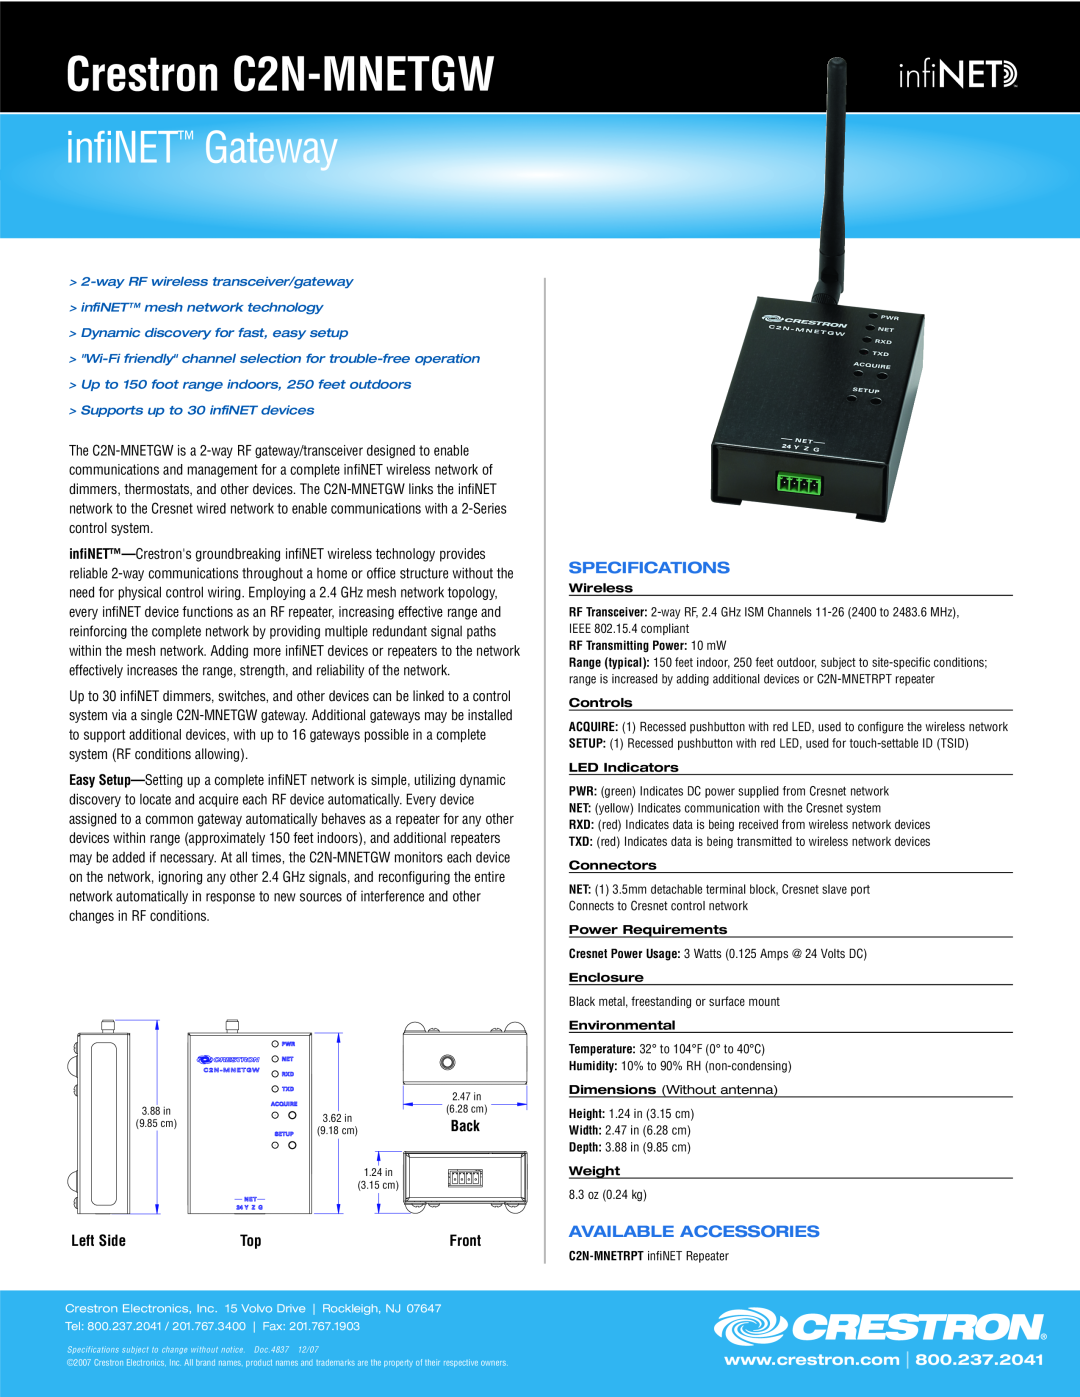 Crestron electronic specifications Crestron C2N-MNETGW, infiNET Gateway, Specifications, Available Accessories 